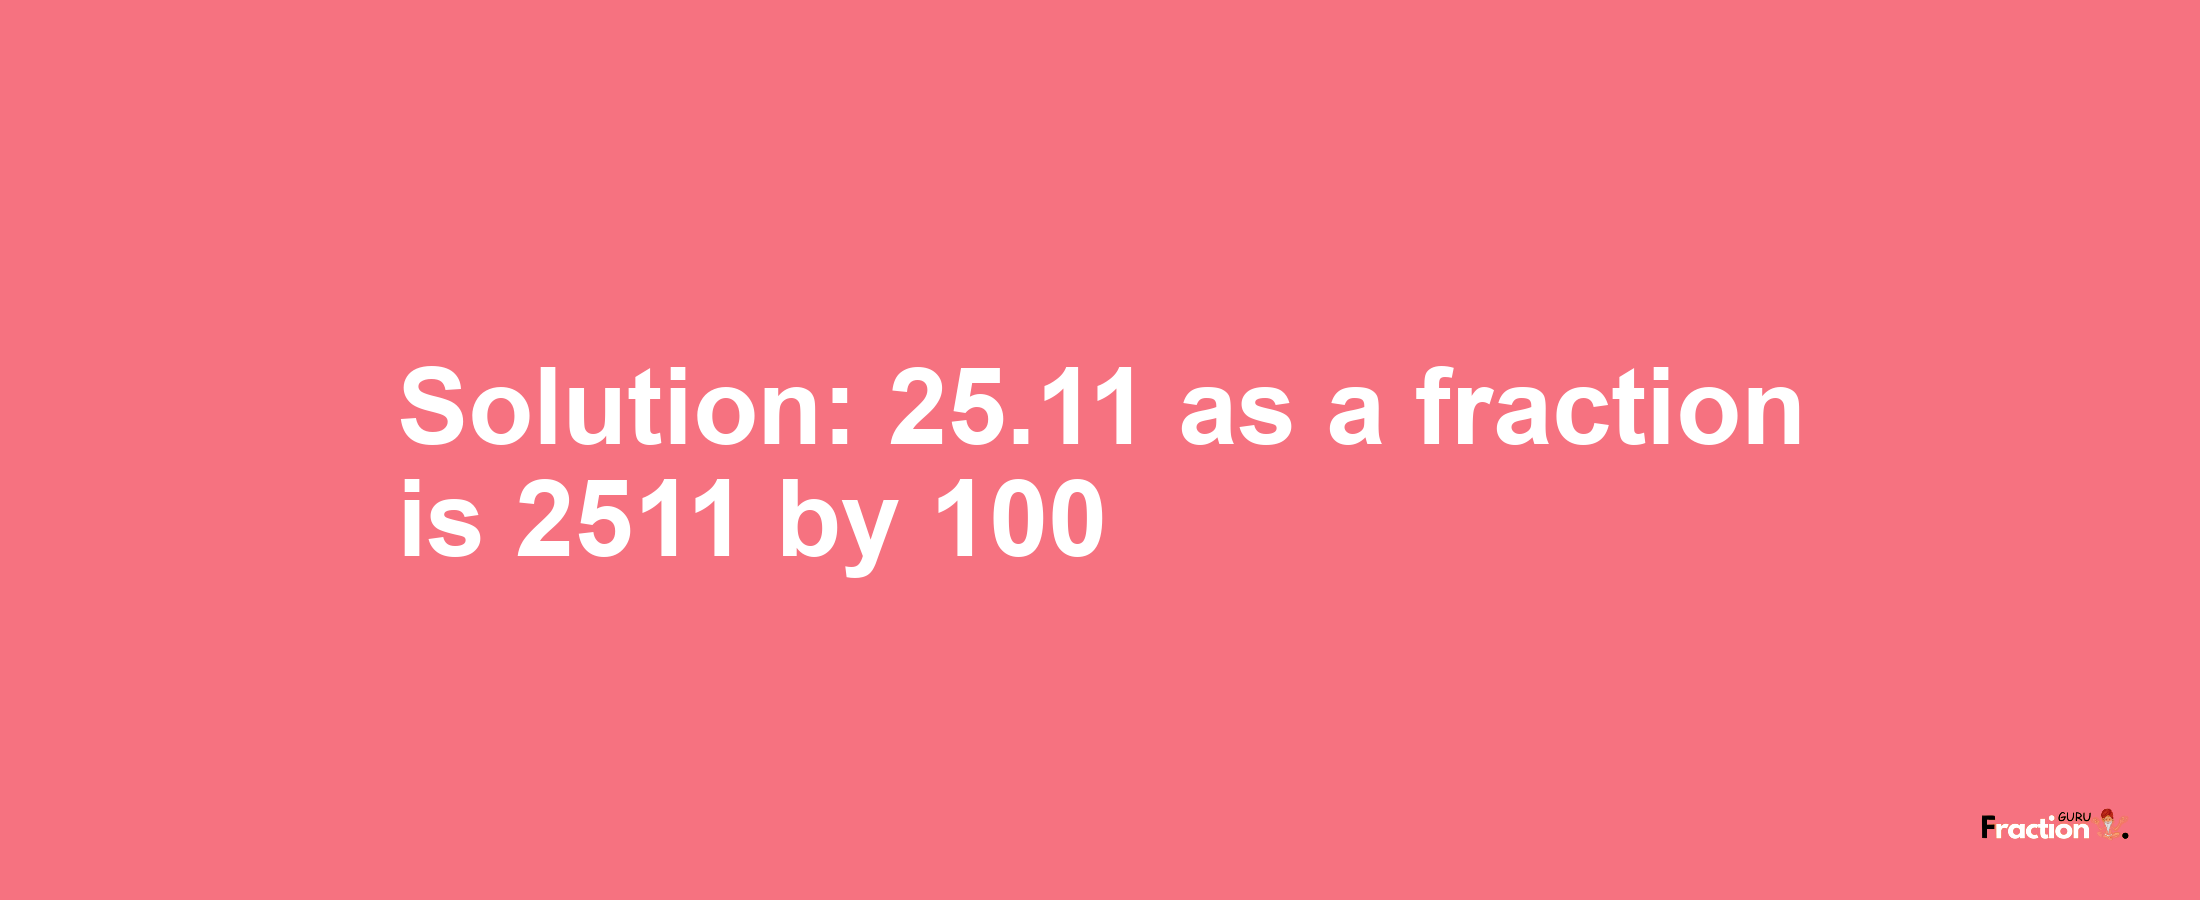 Solution:25.11 as a fraction is 2511/100